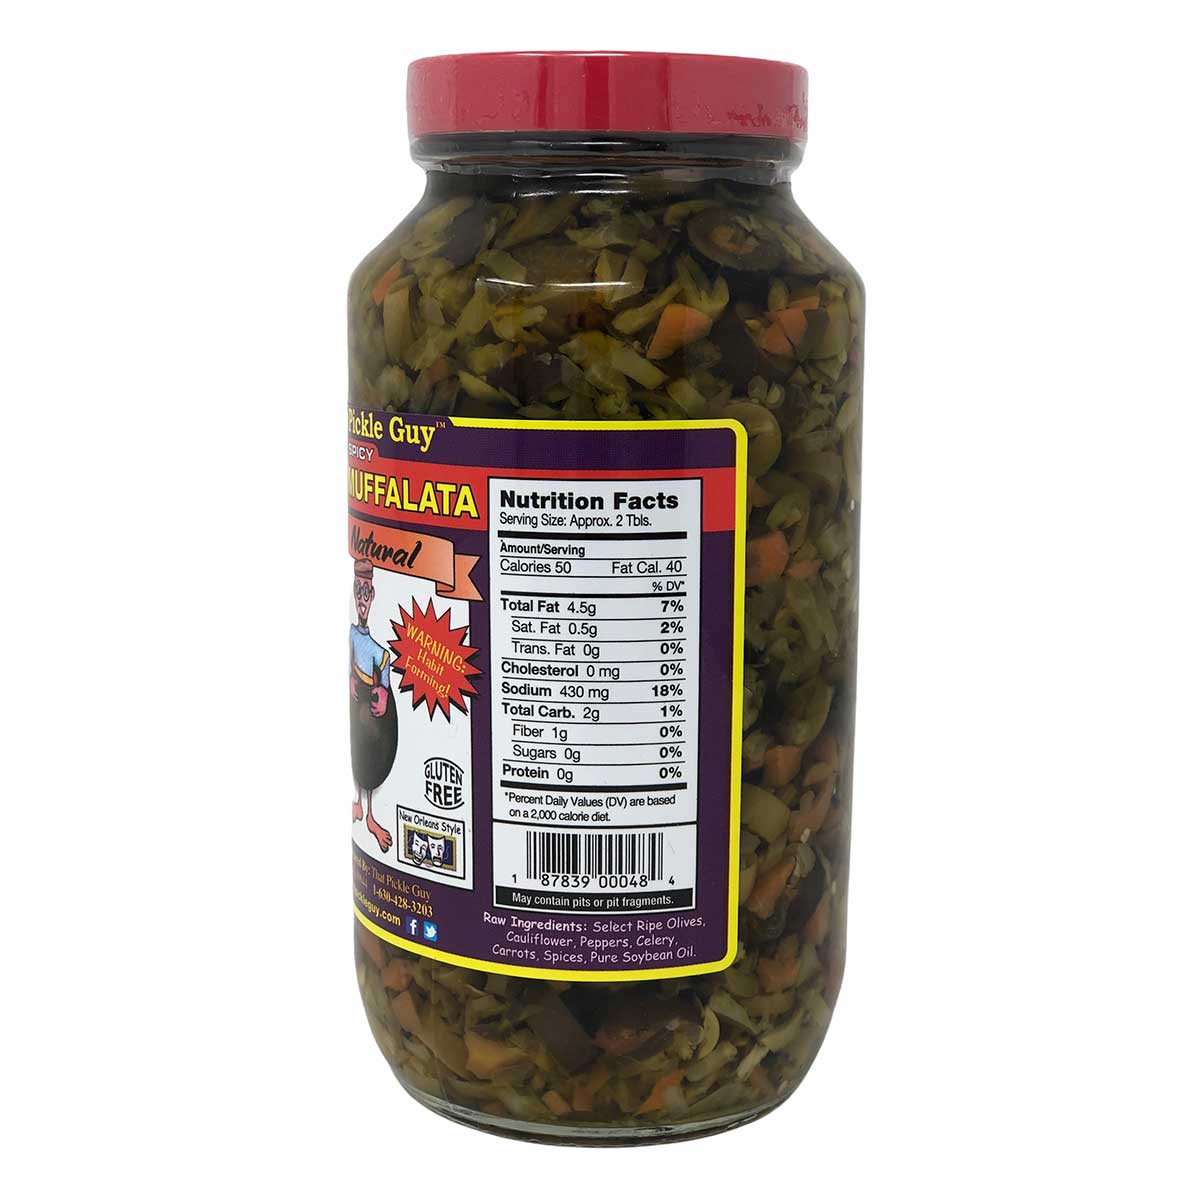 https://gourmet-passions.com/cdn/shop/products/That-Pickle-Guy-New-Orleans-Style-Spicy-Olive-Muffalata-24-oz-03.jpg?v=1654913712&width=1445